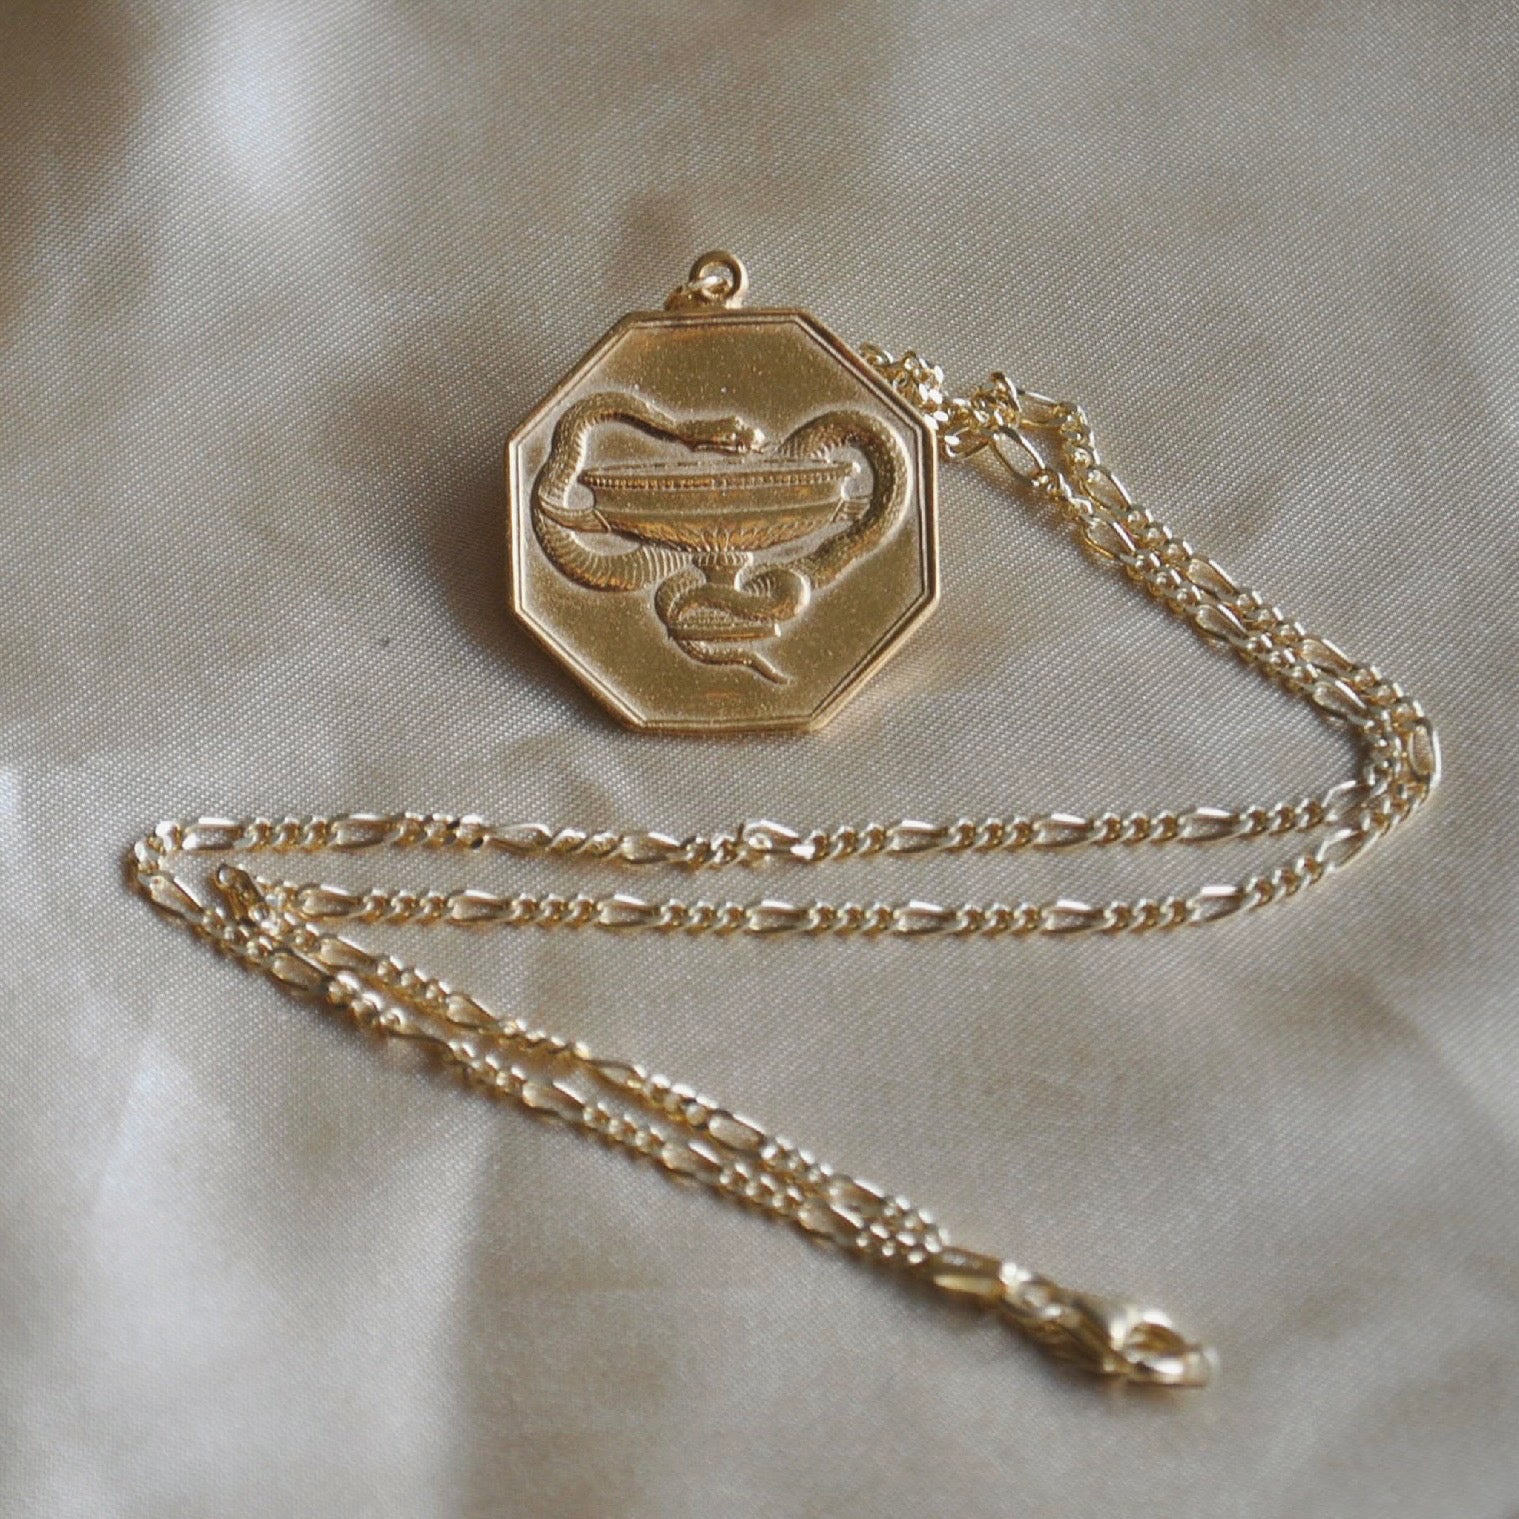 The Baptist-Ophis necklace